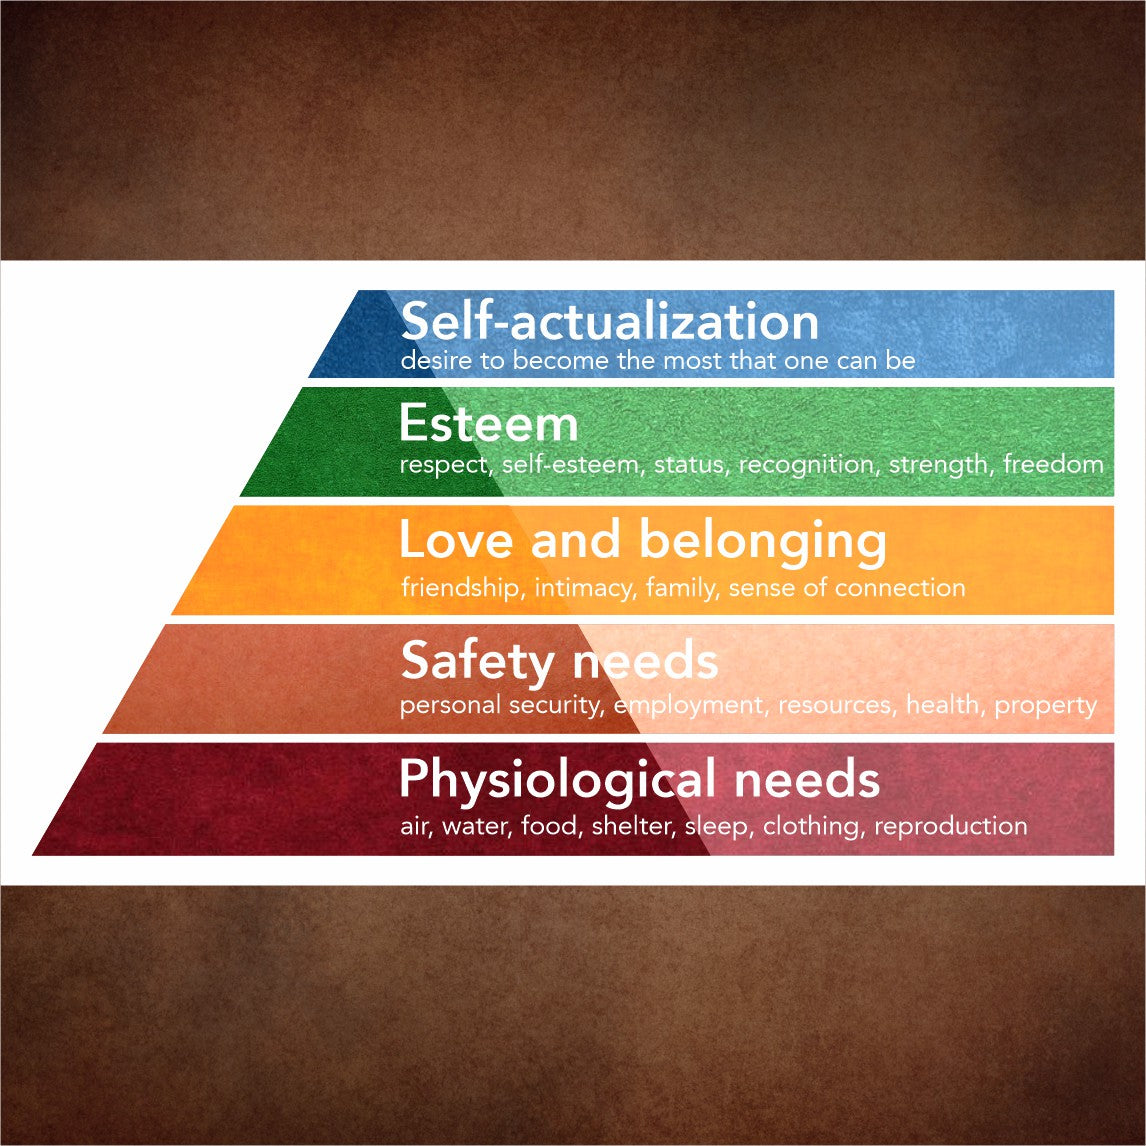 What is Abraham Maslow's Hierarchy of needs?